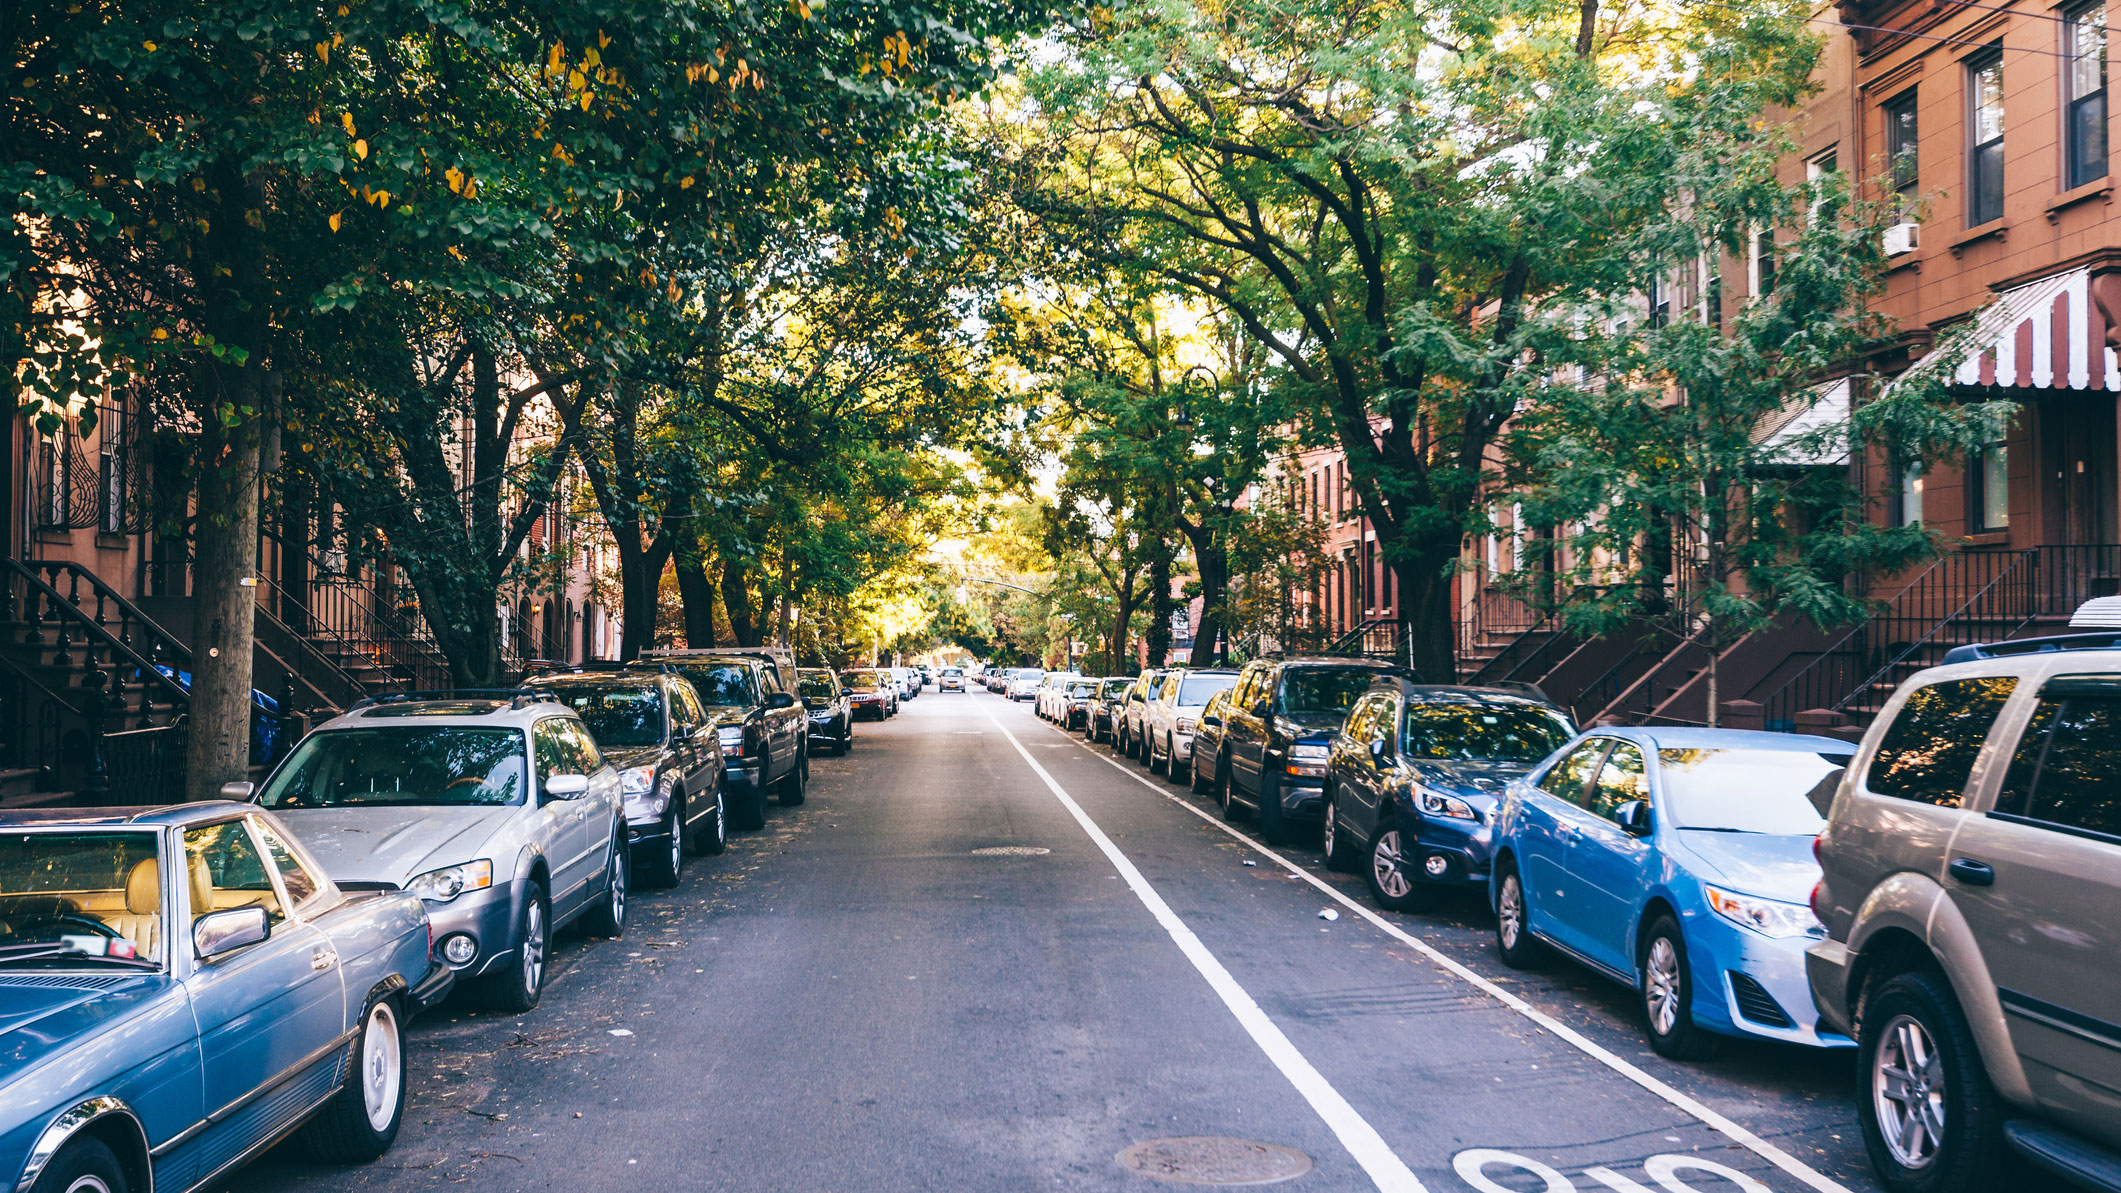 A street in a neighborhood of brownstones with the road lined with cars on both sides